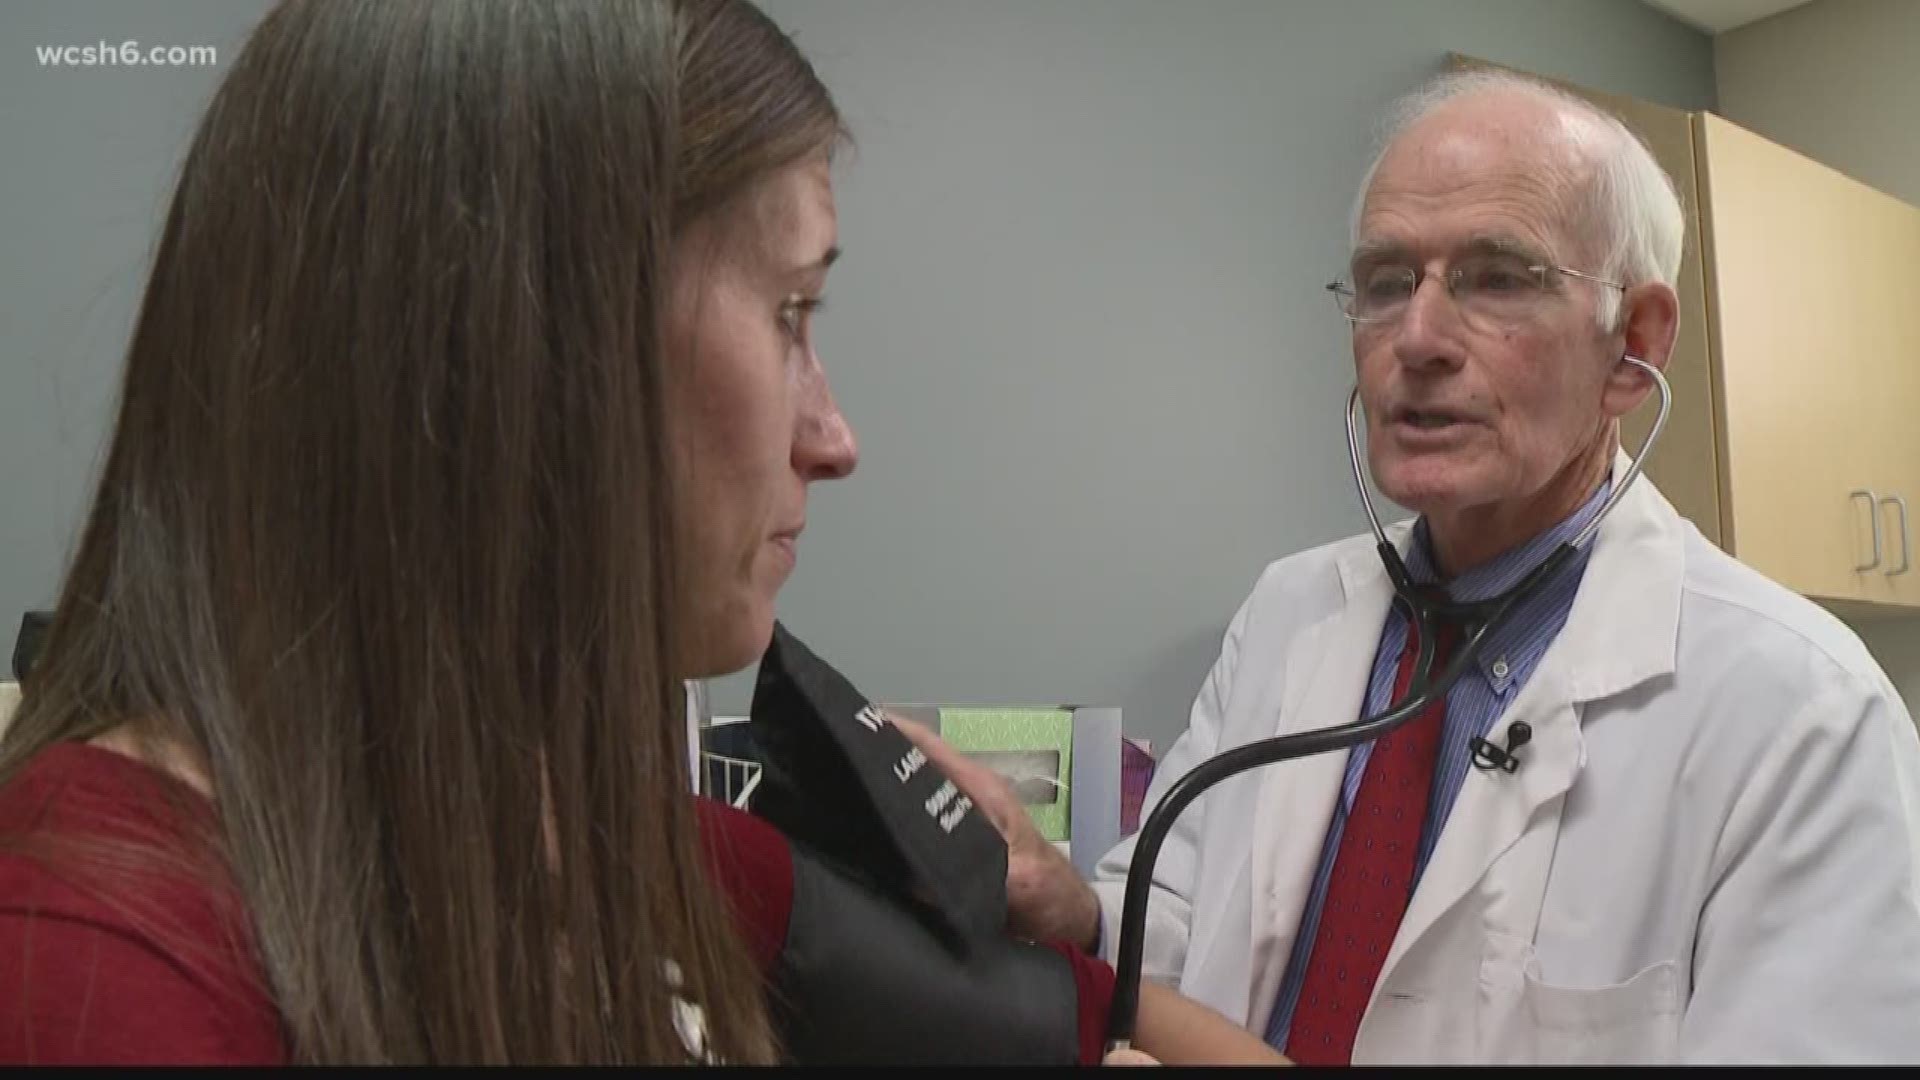 Doctors in rural Maine worry about replacements